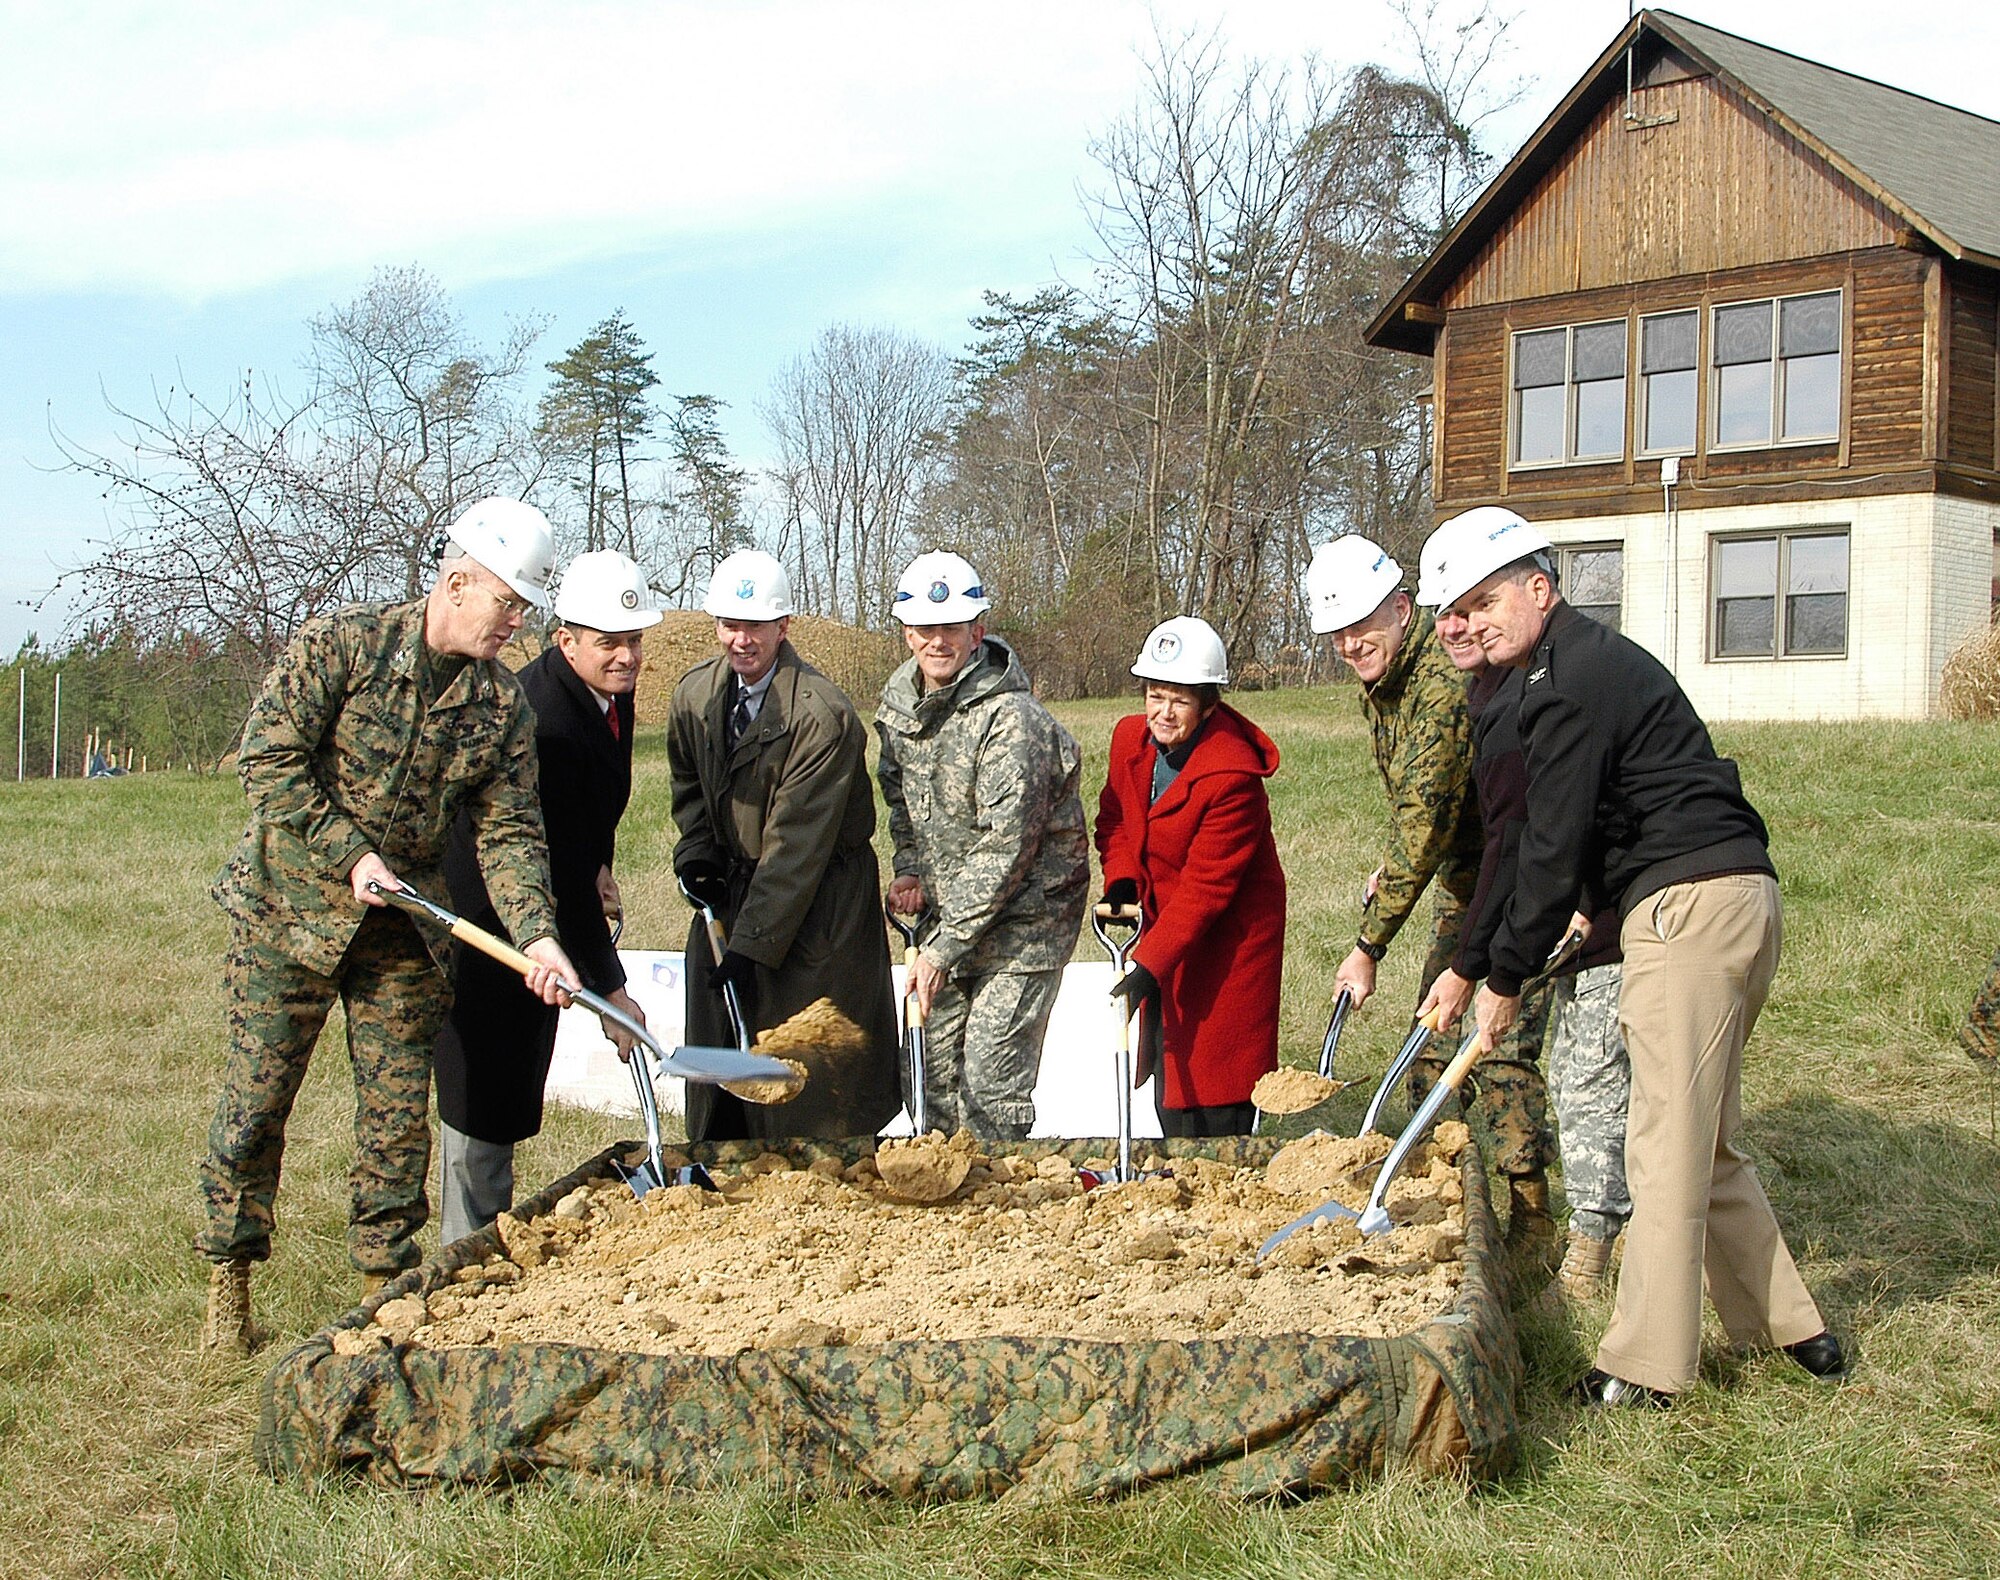 Mr. Thomas, Air Force Office of Special Investigations Executive Director (third from left) and senior agency representatives from the Army's Criminal Investigative Command, the Defense Security Service, the Naval Criminal Investigative Service, and elements of the Defense Intelligence Agency armed up with shovels and jointly turned the first soil for the new Military Department Investigative Agencies facility located at Marine Corps Base Quantico, Va.
